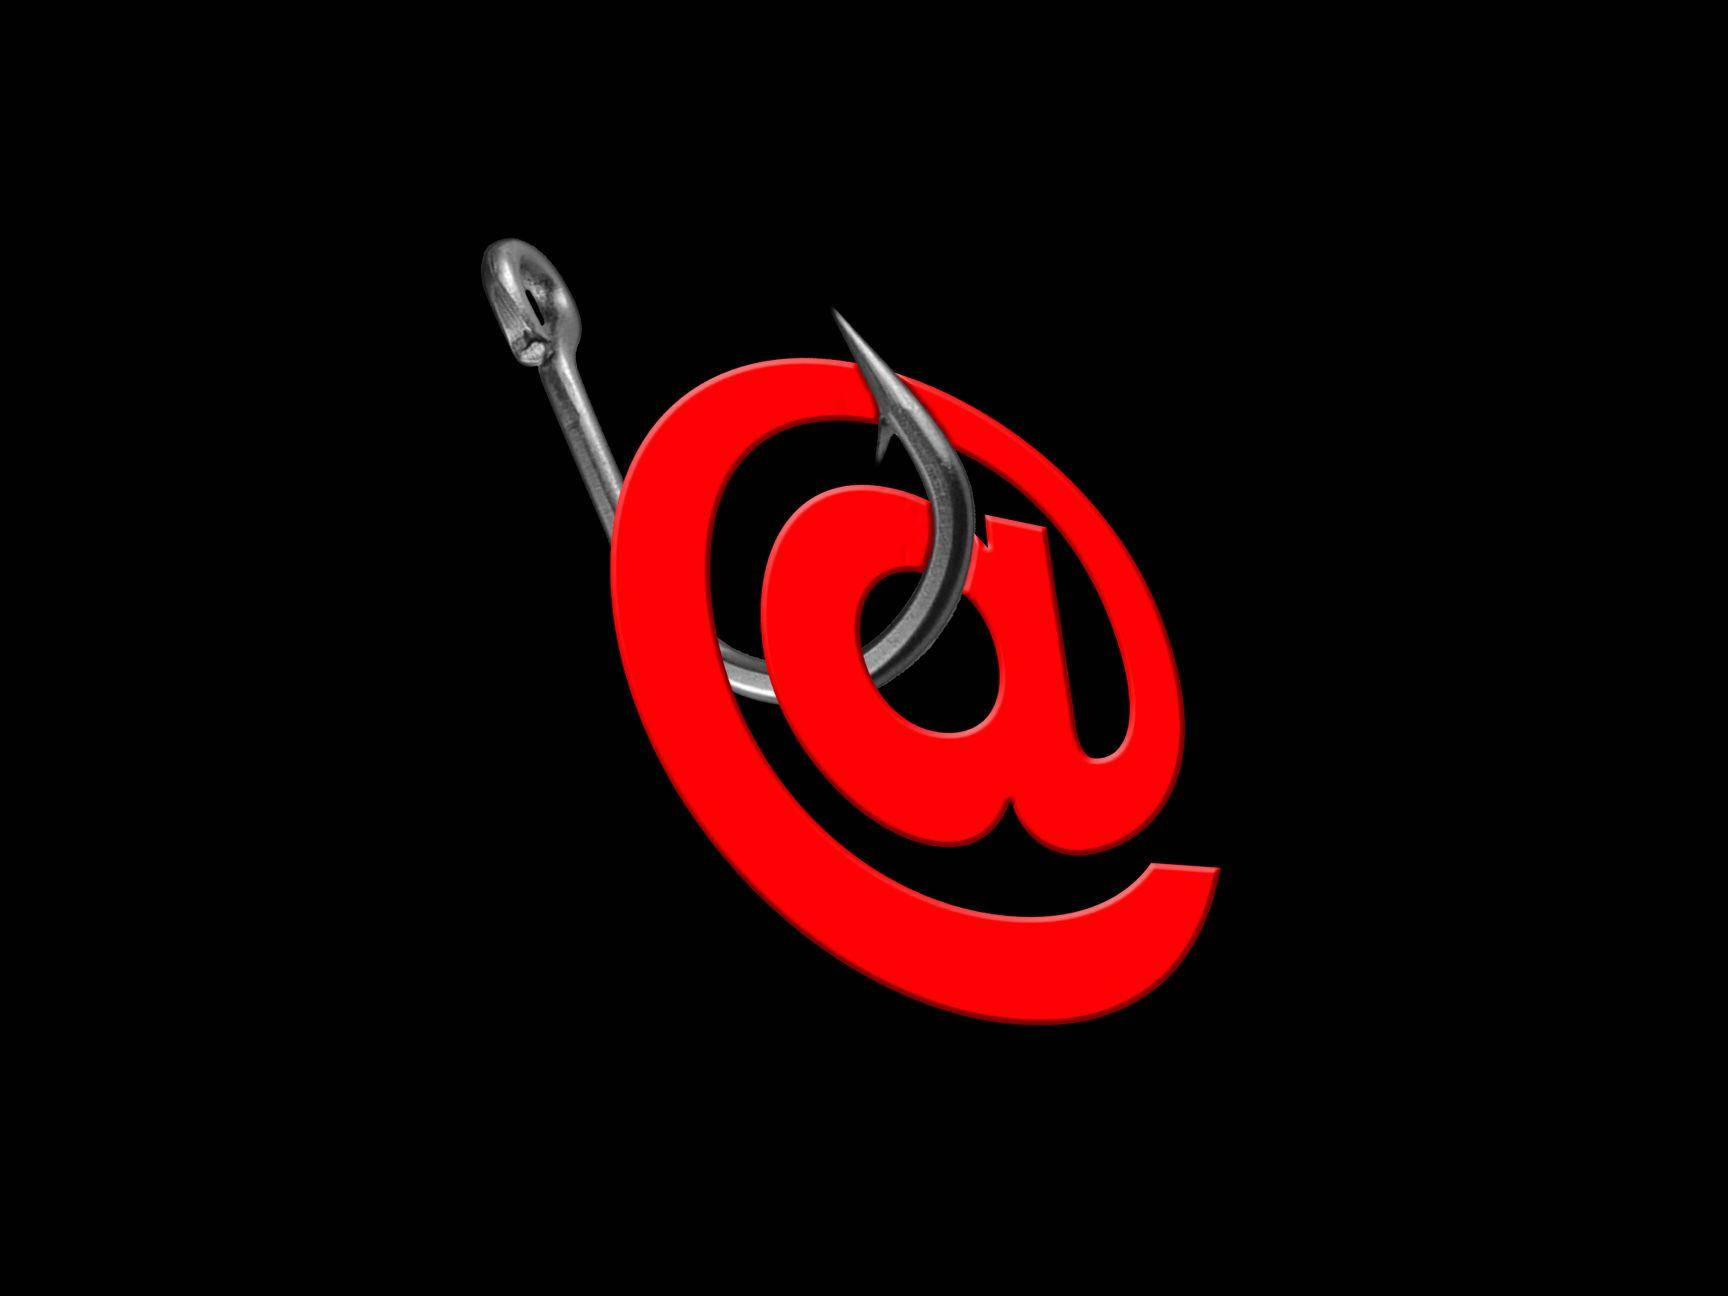 Hooked Email Symbol Wallpaper